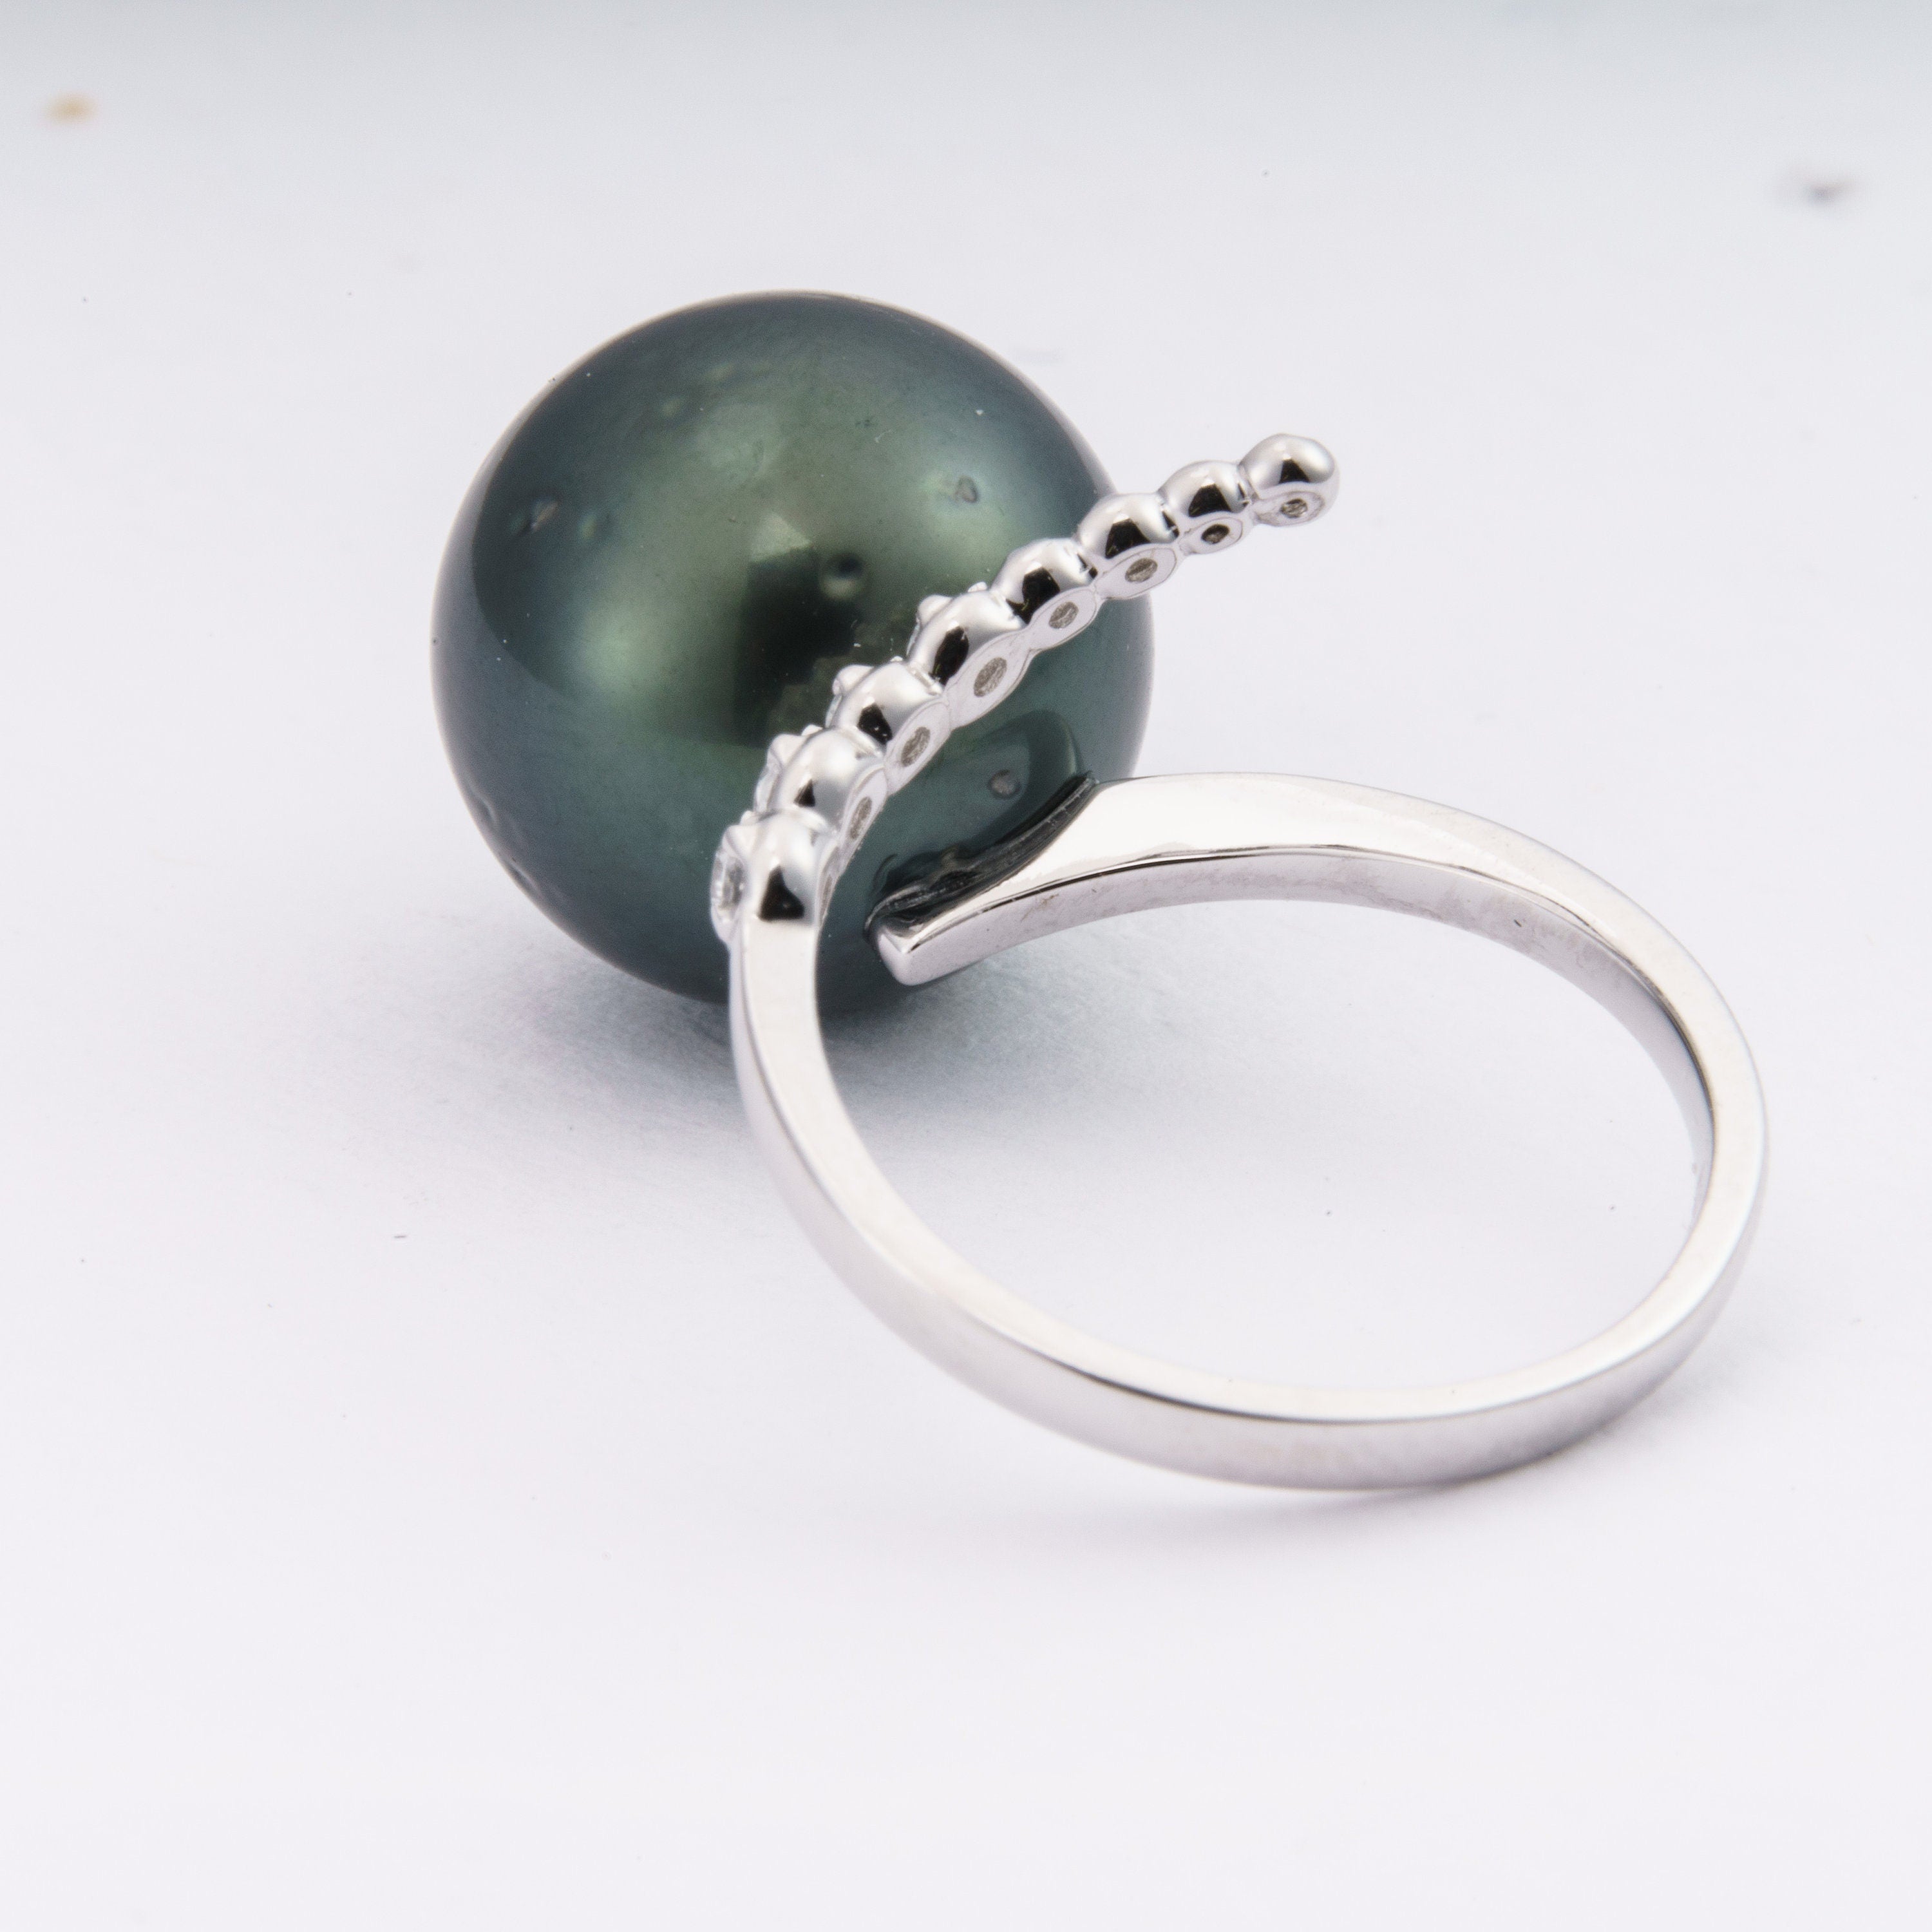 13mm tahitian pearl ring, size 5.5 us, 925 sterling silver with cubic zirconia